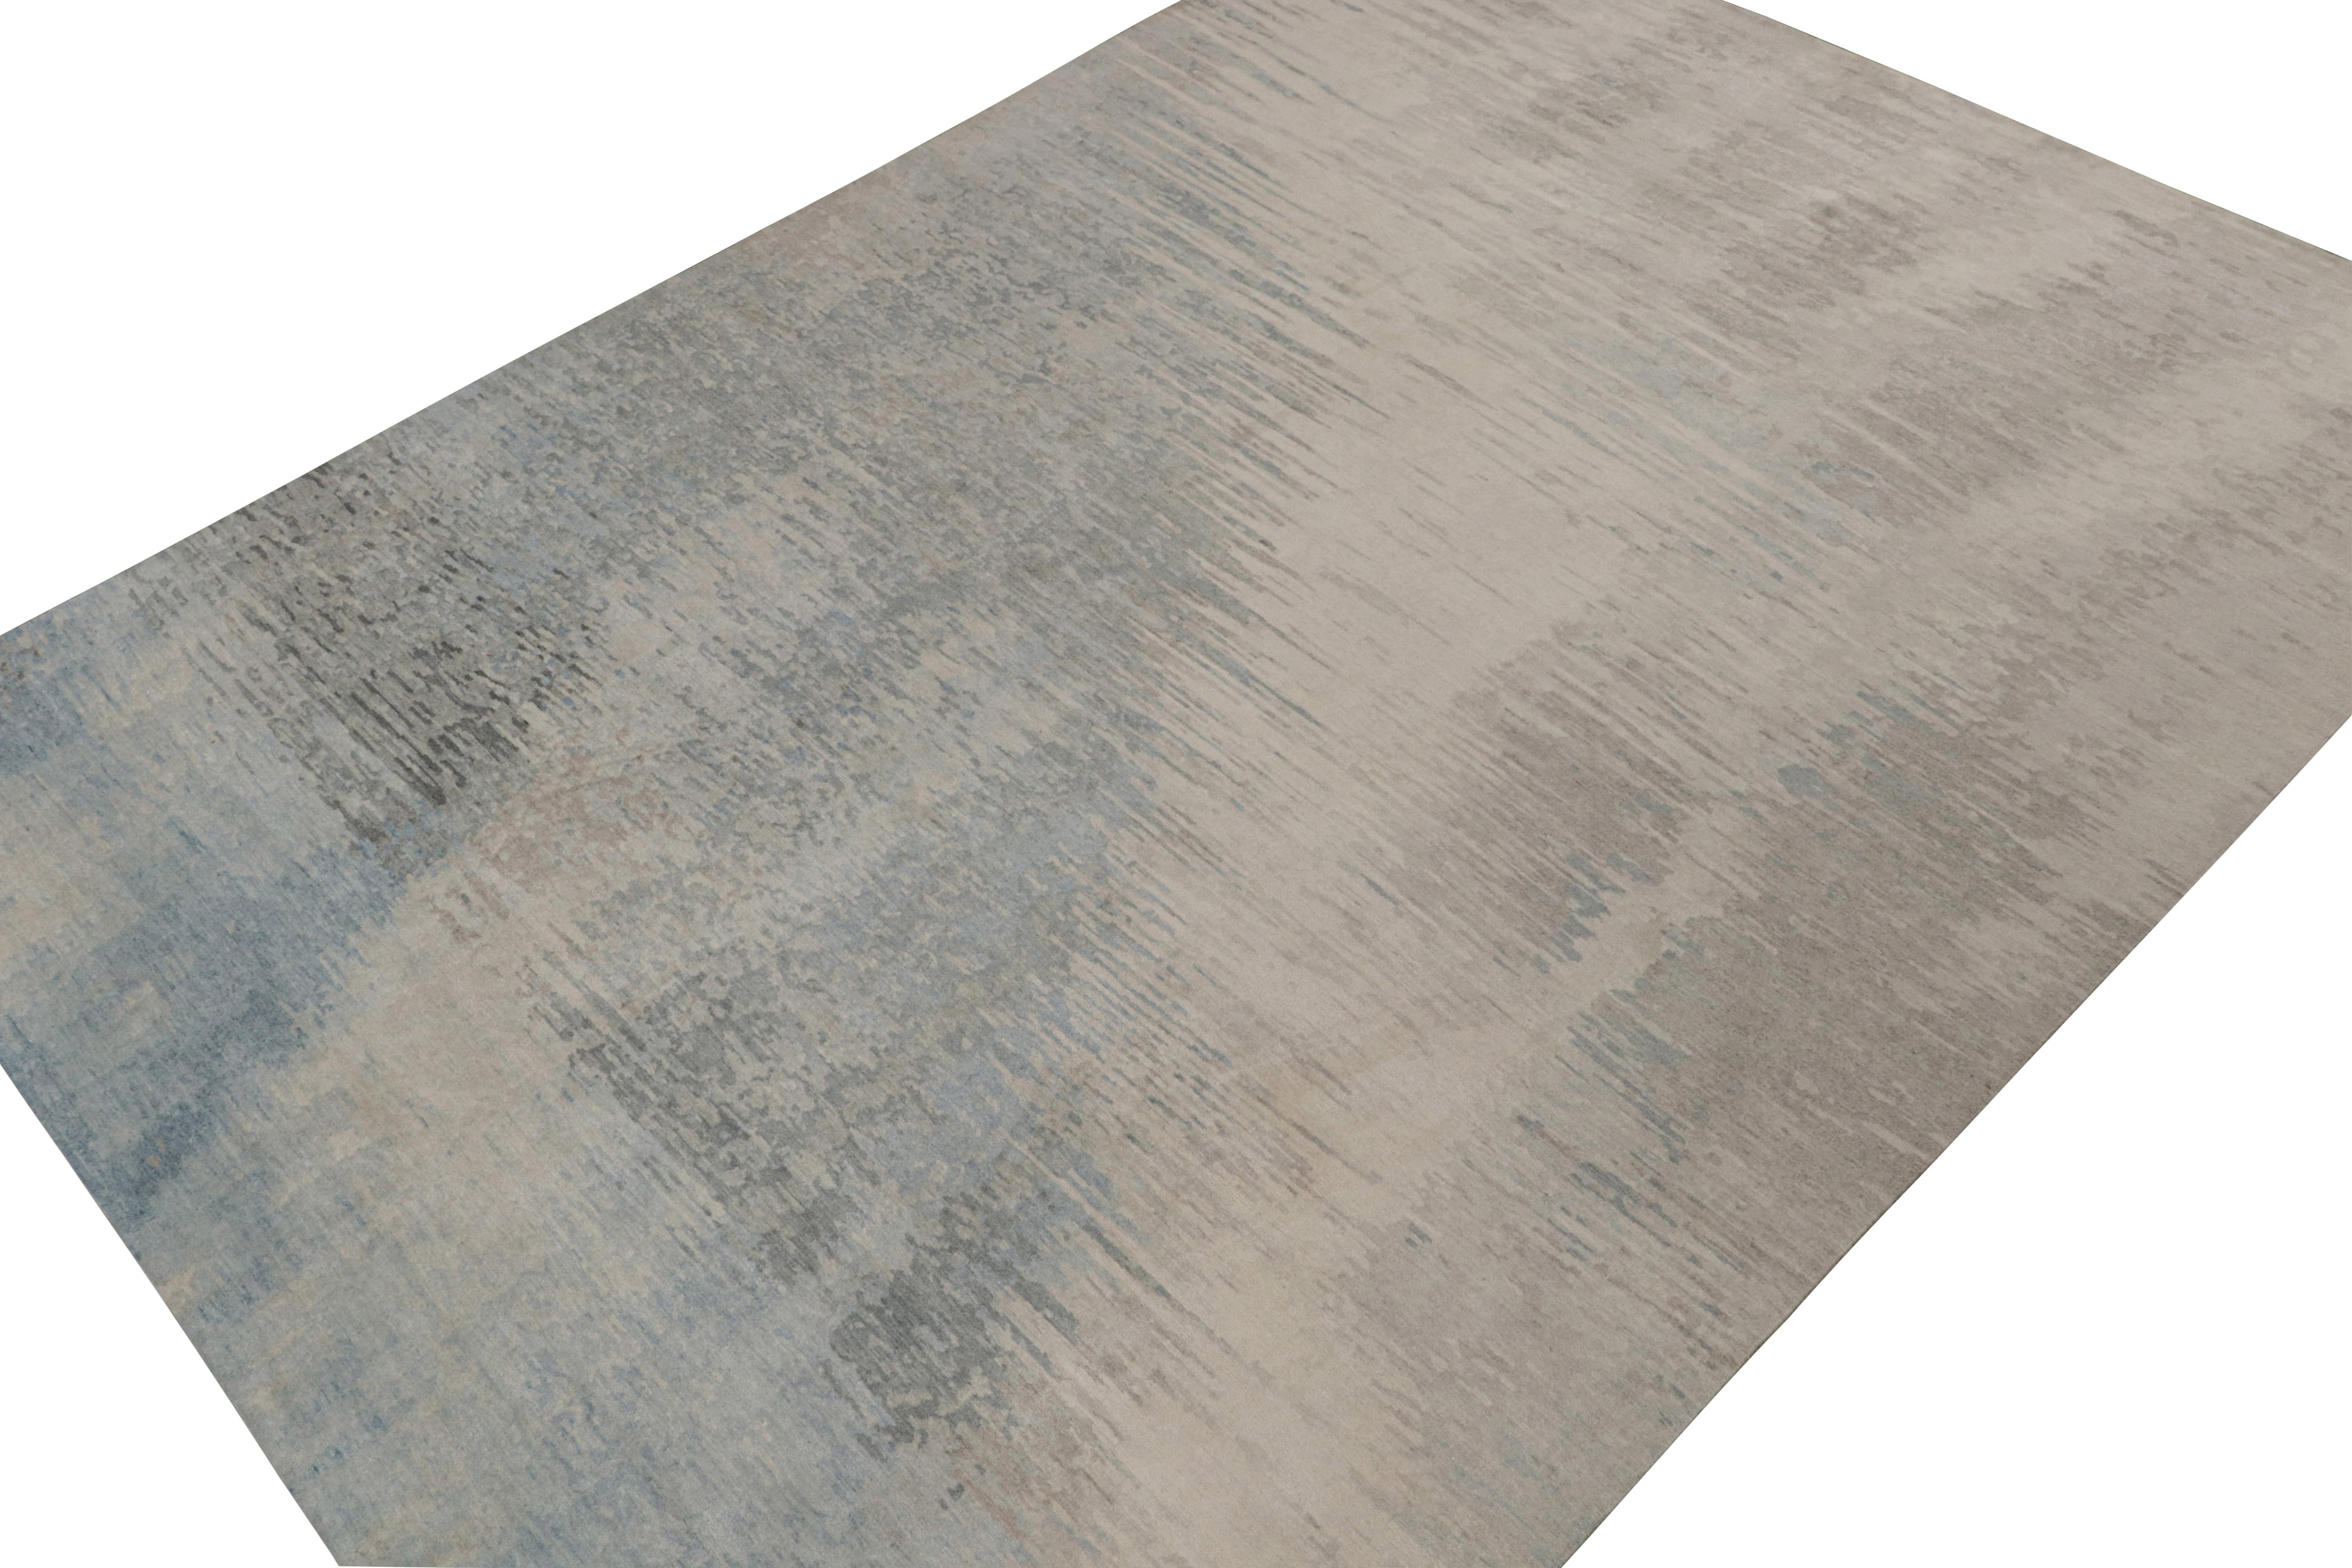 This contemporary 10x14 abstract rug is an exciting new entry in Rug & Kilim’s Modern Collection—hand-knotted in wool and silk. 

On the Design:

This abstract rug enjoys a smart play of cool tones and neutrals with a subtle look of depth to the